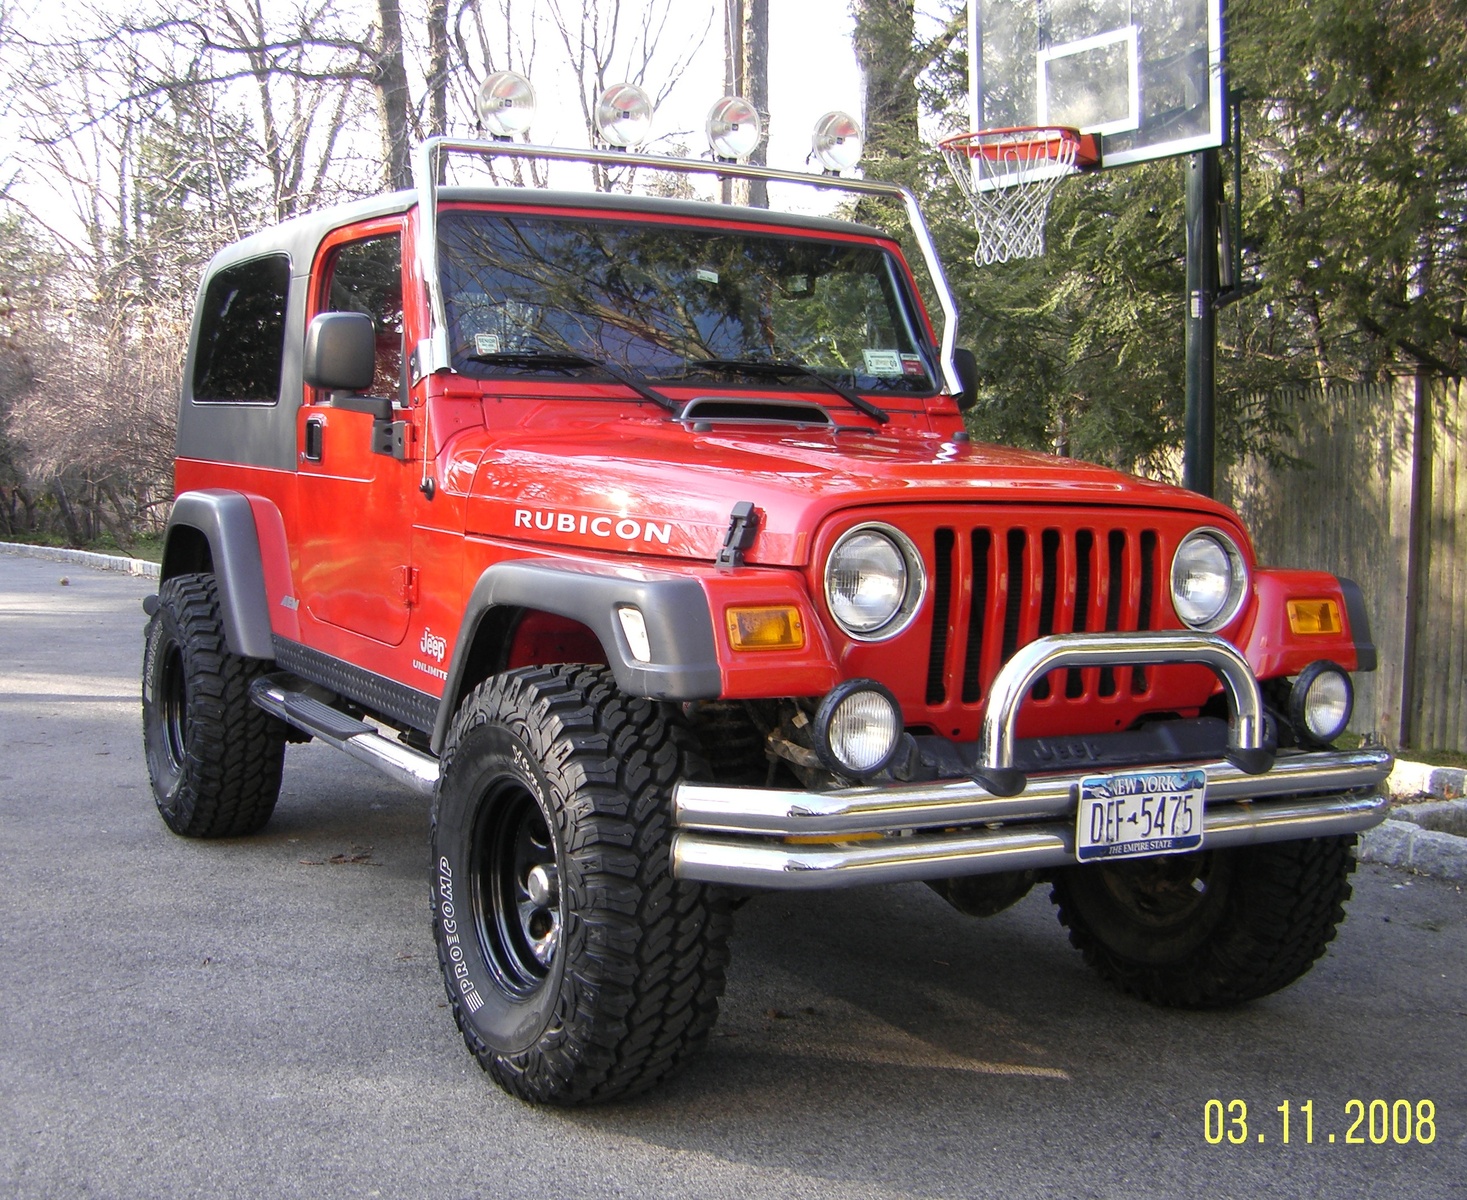 2005 Jeep rubicon unlimited reviews #2